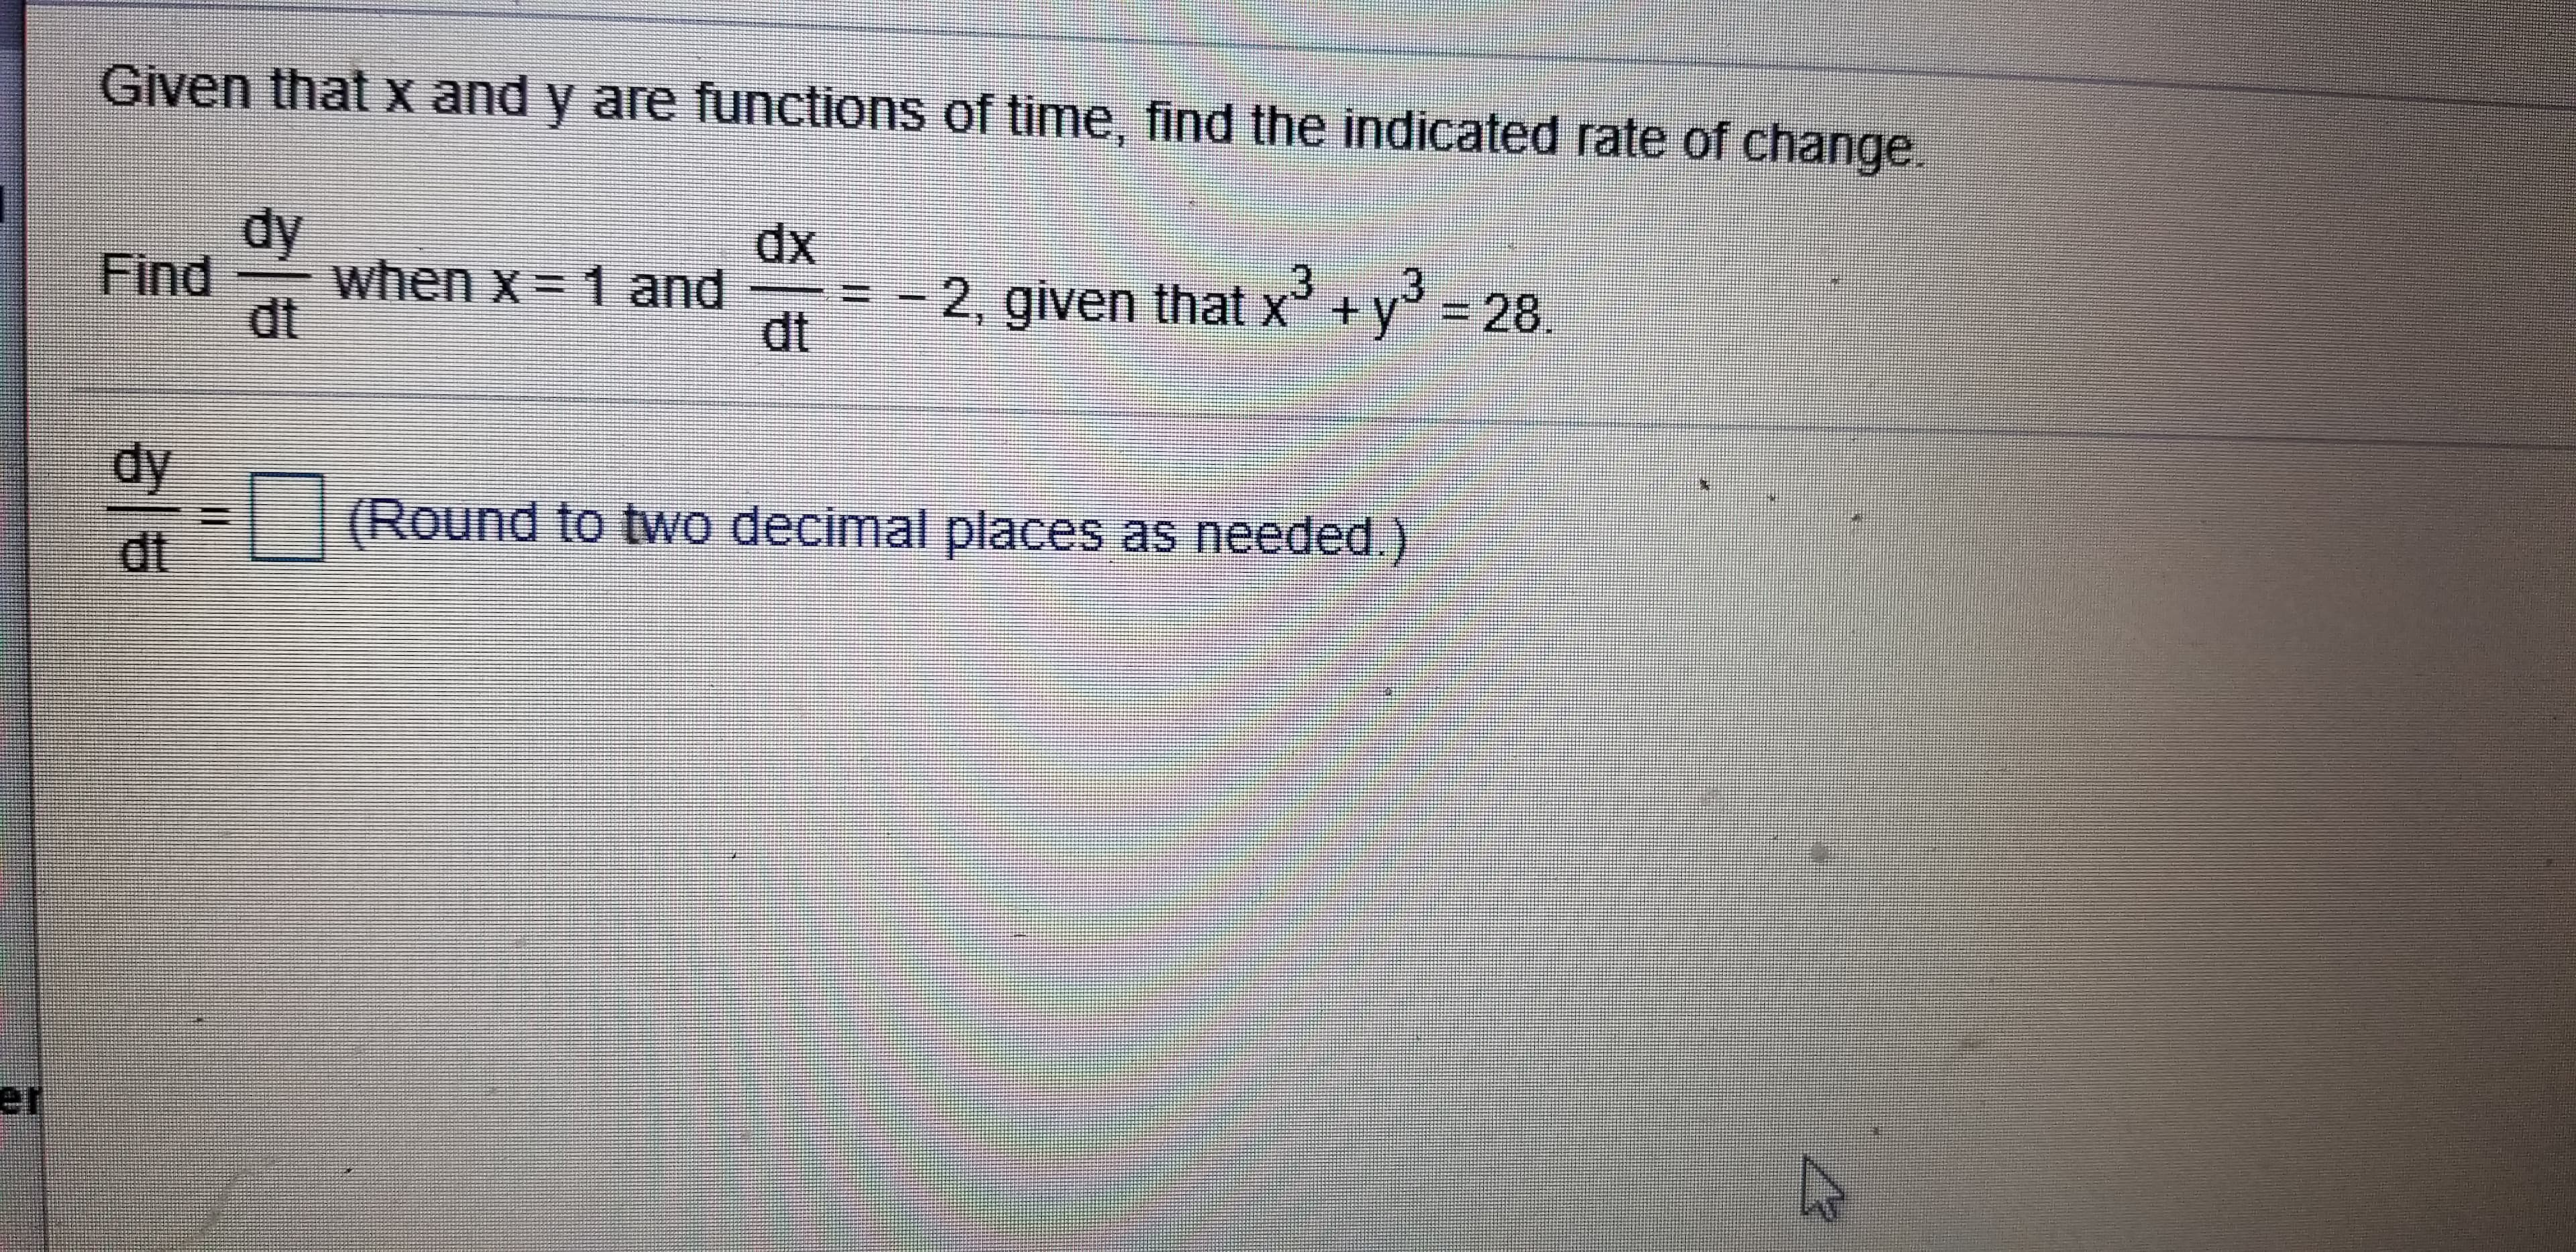 Given that x and y are functions of time, find the indicated rate of change.
dy
dx
Find
when x
1 and
-2, given that x
dt
+ y
= 28
dt
dy
(Round to two decimal places as needed.)
dt
er
